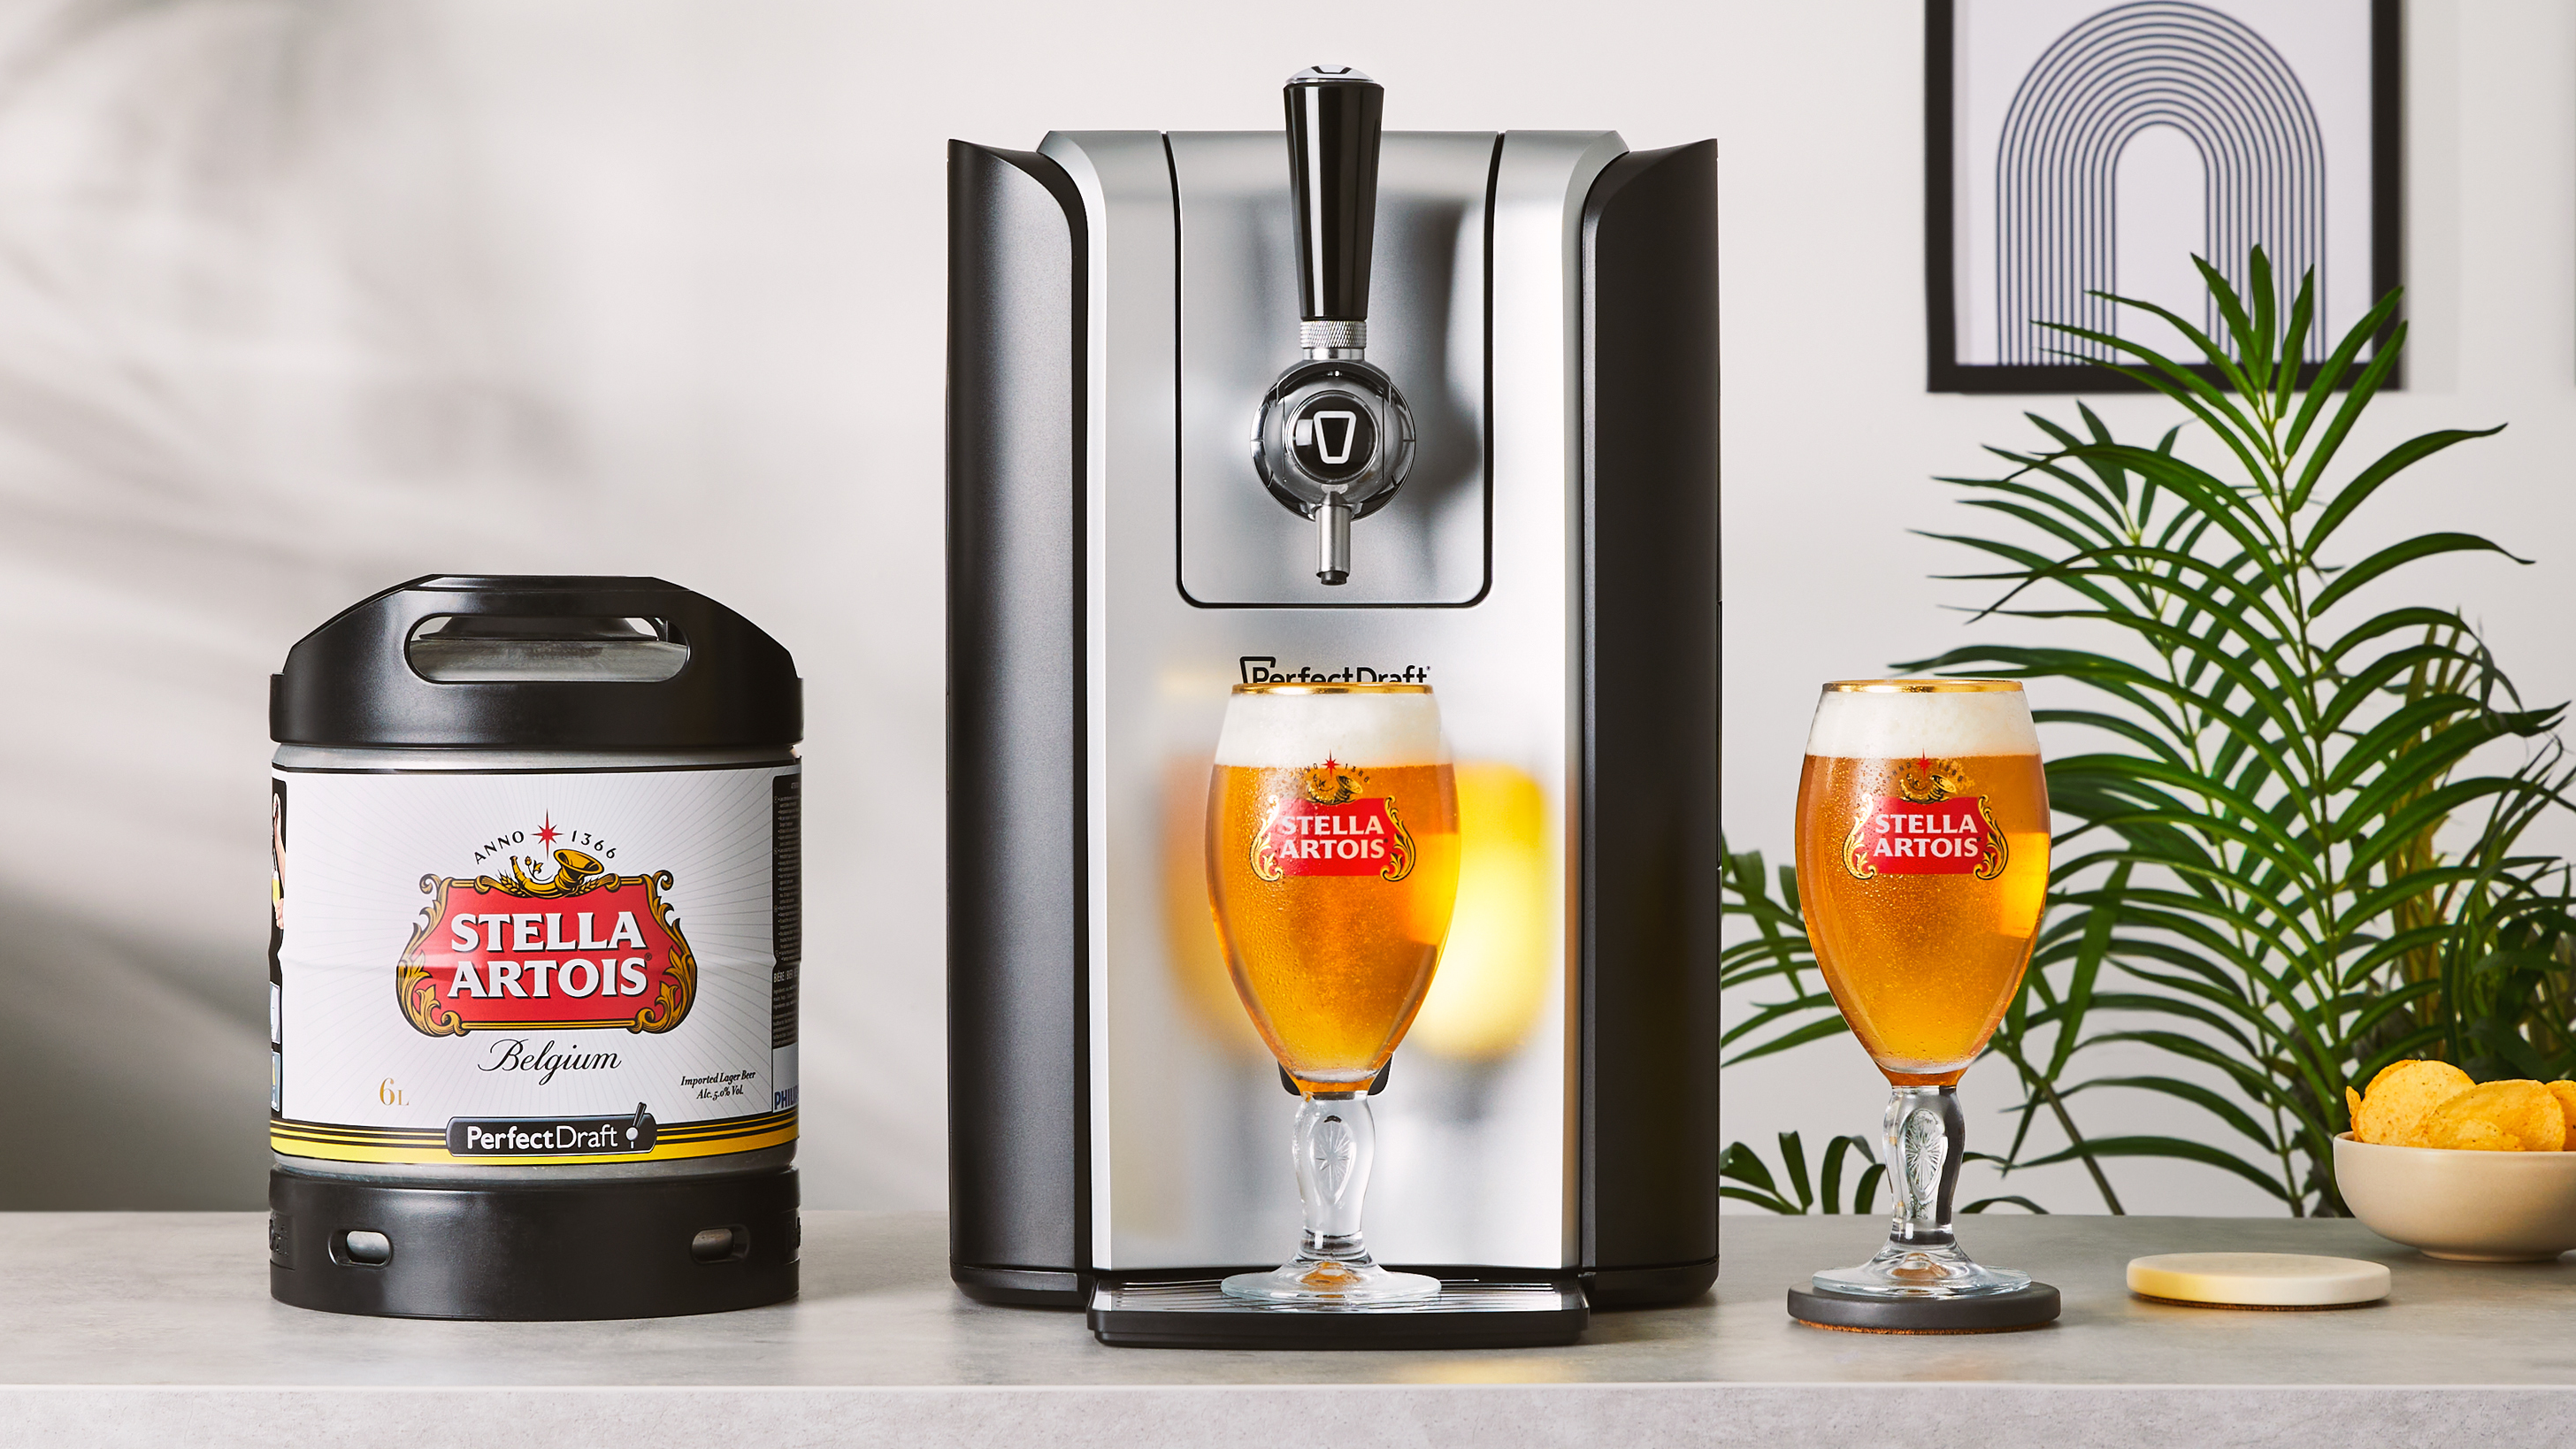 PerfectDraft: Bring the ultimate beer experience to any occasion